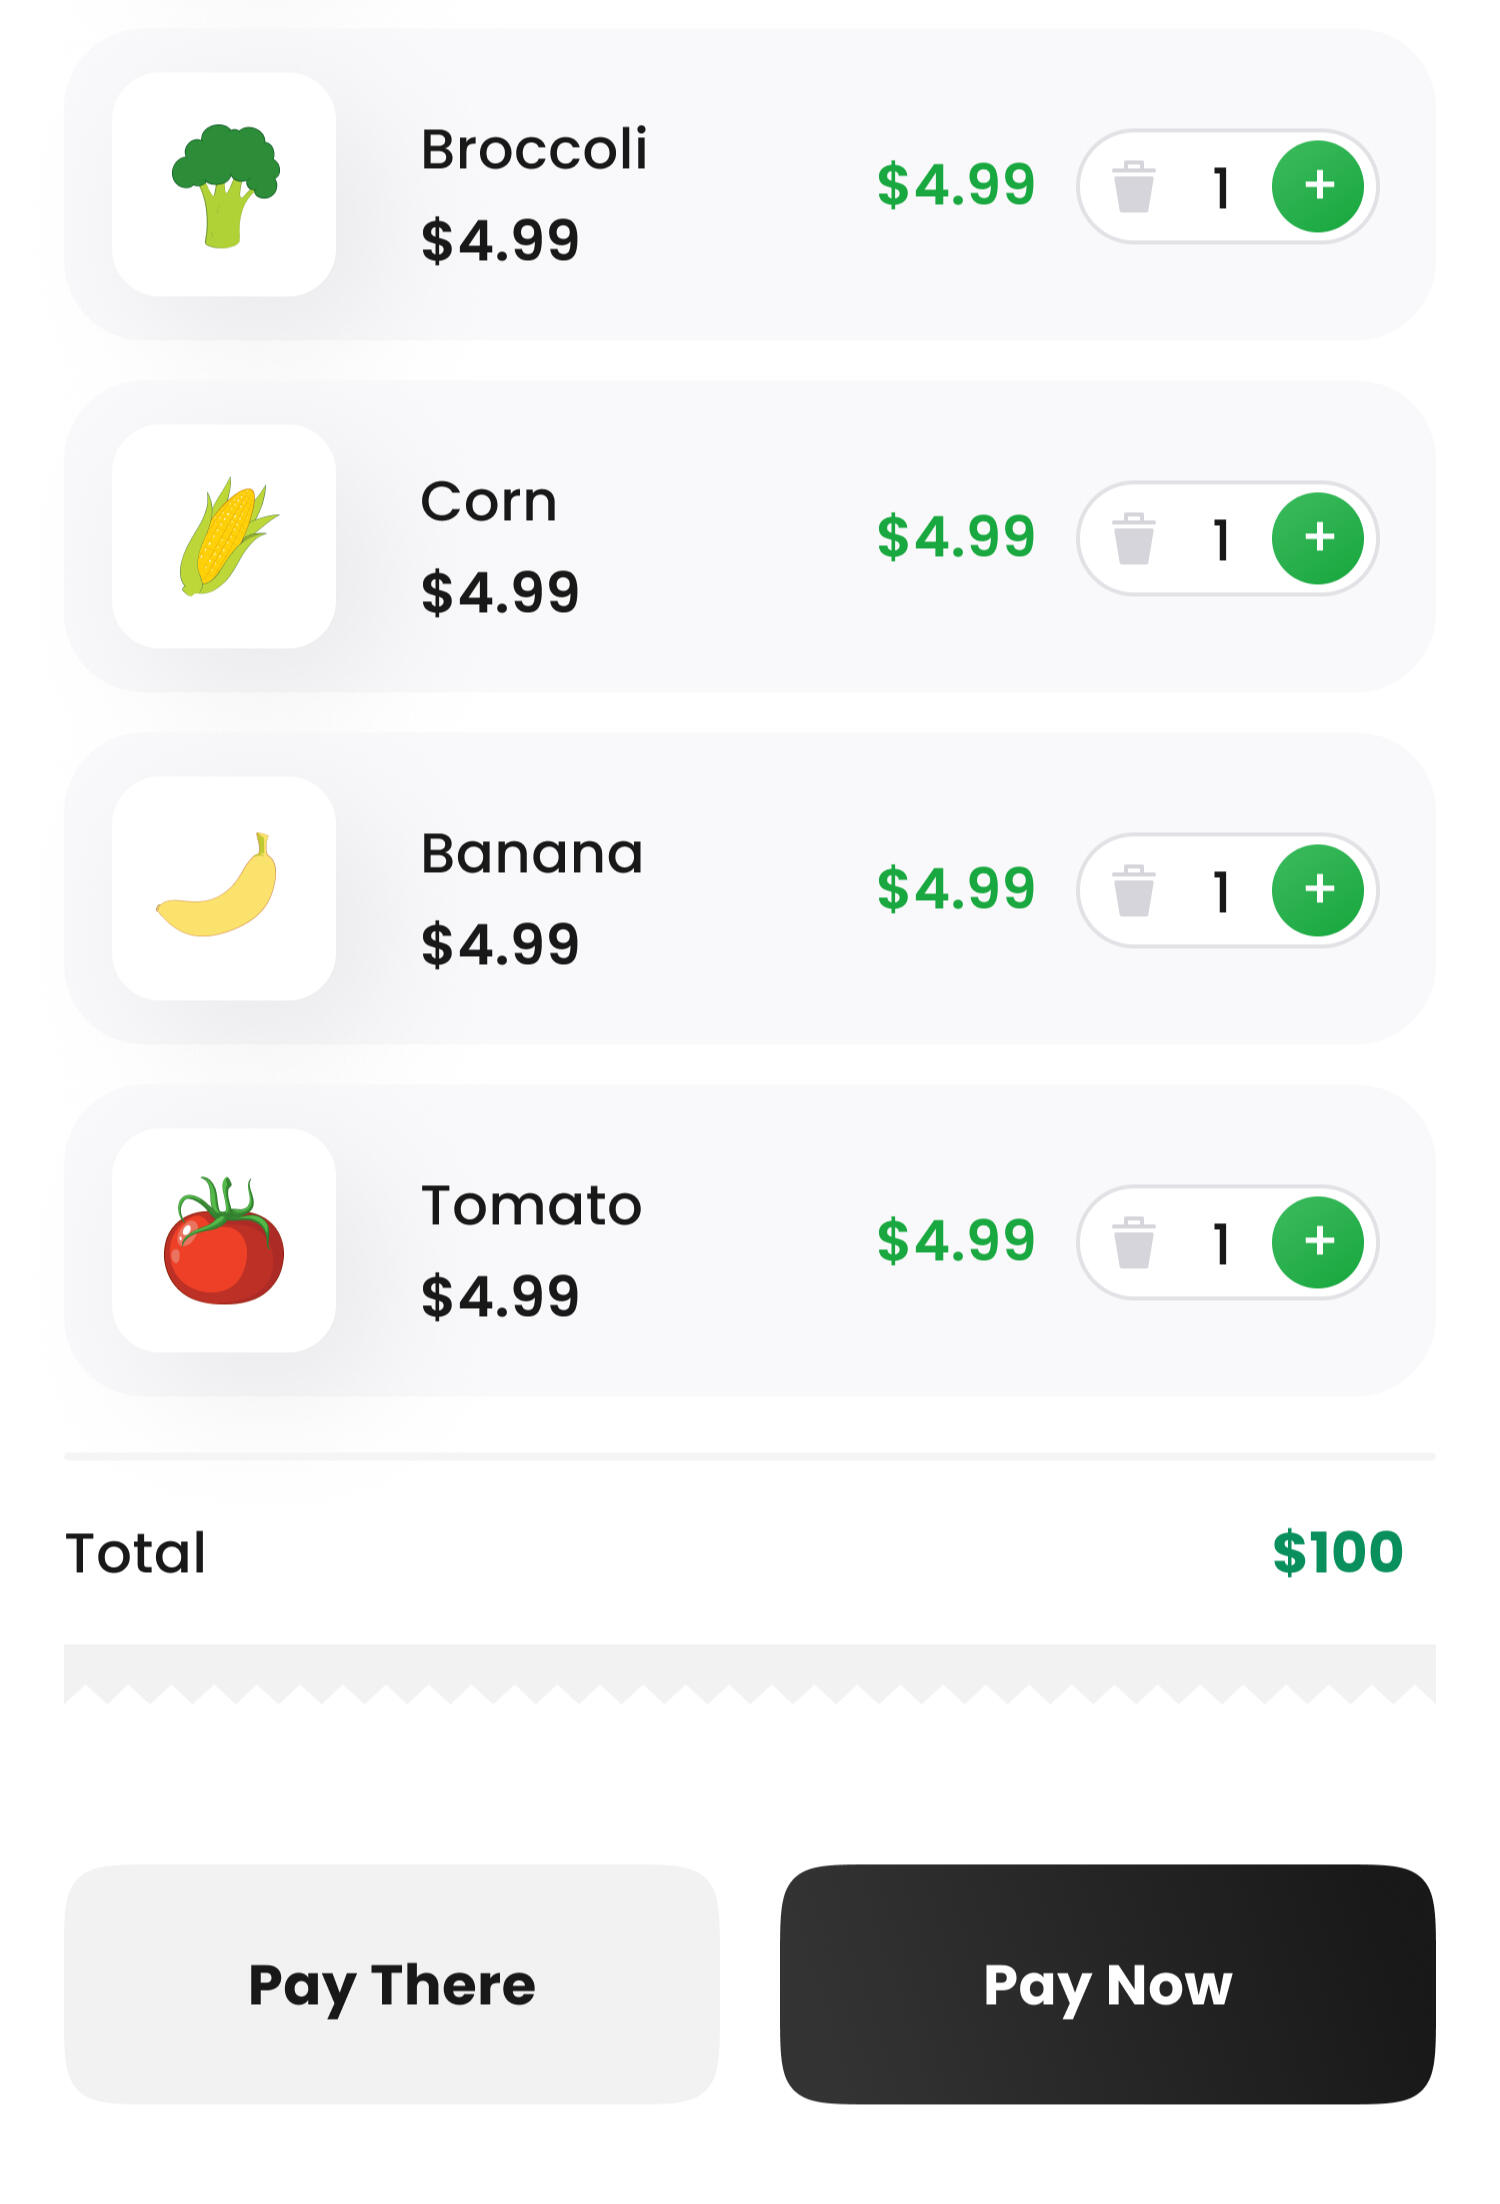 A screenshot of the shopping cart in the reko day mobile app showing the items, quantity, prices, and the options to pay now in the app or pay in cash on pickup.